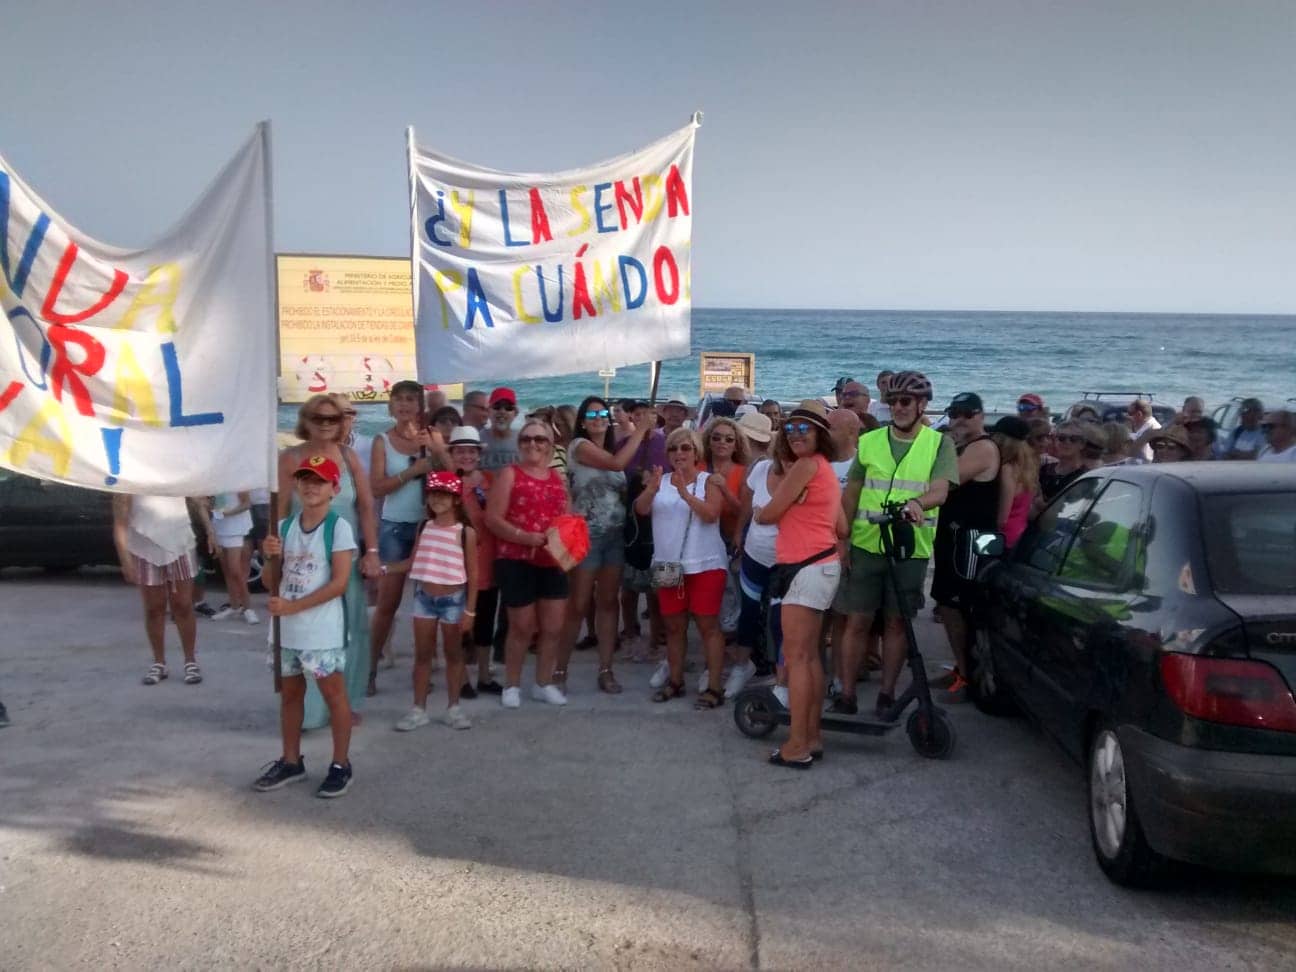 One of the local protests from over the years asking for the coastal path. /EUGENIO CABEZAS